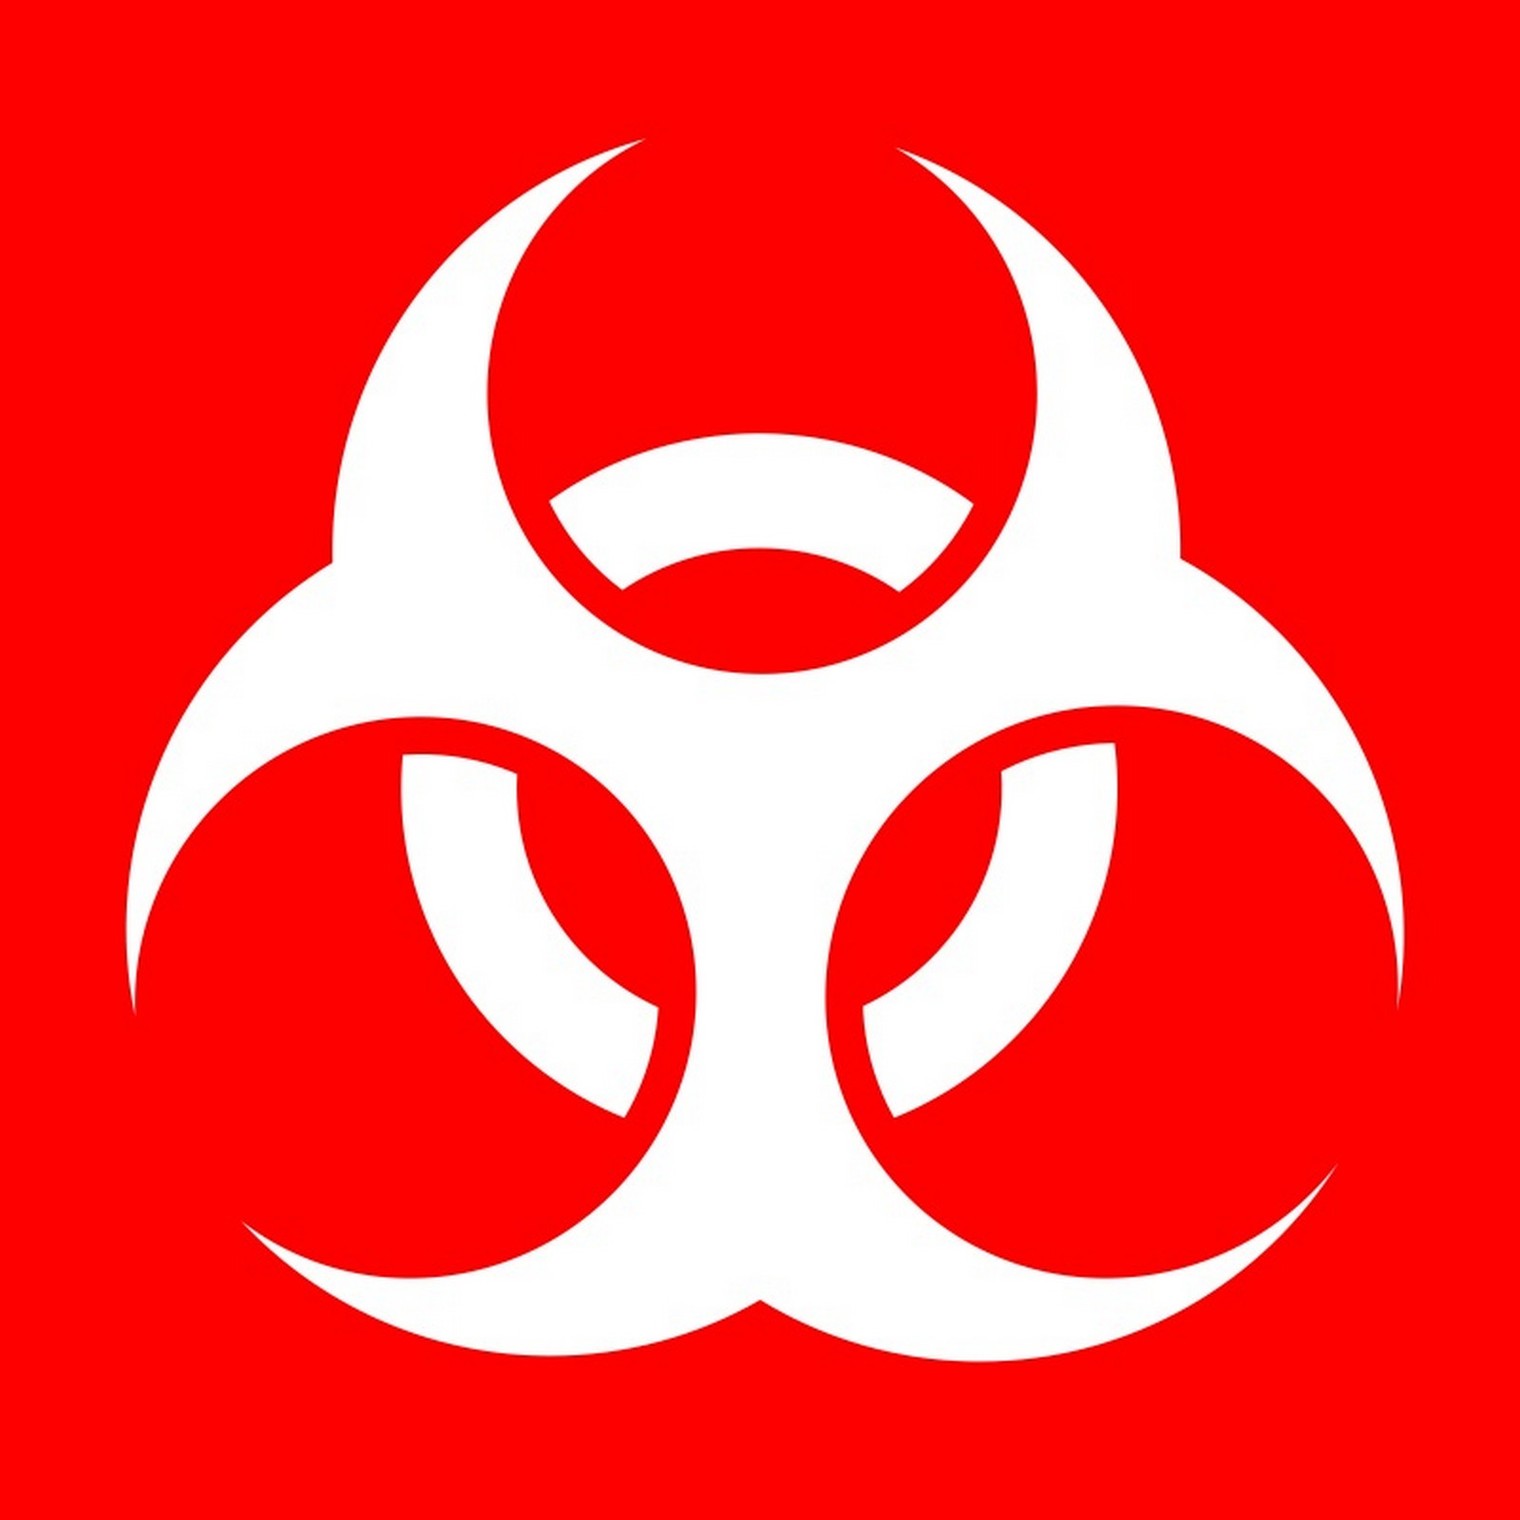 Nuclear Hazard Sign Clipart - Free to use Clip Art Resource